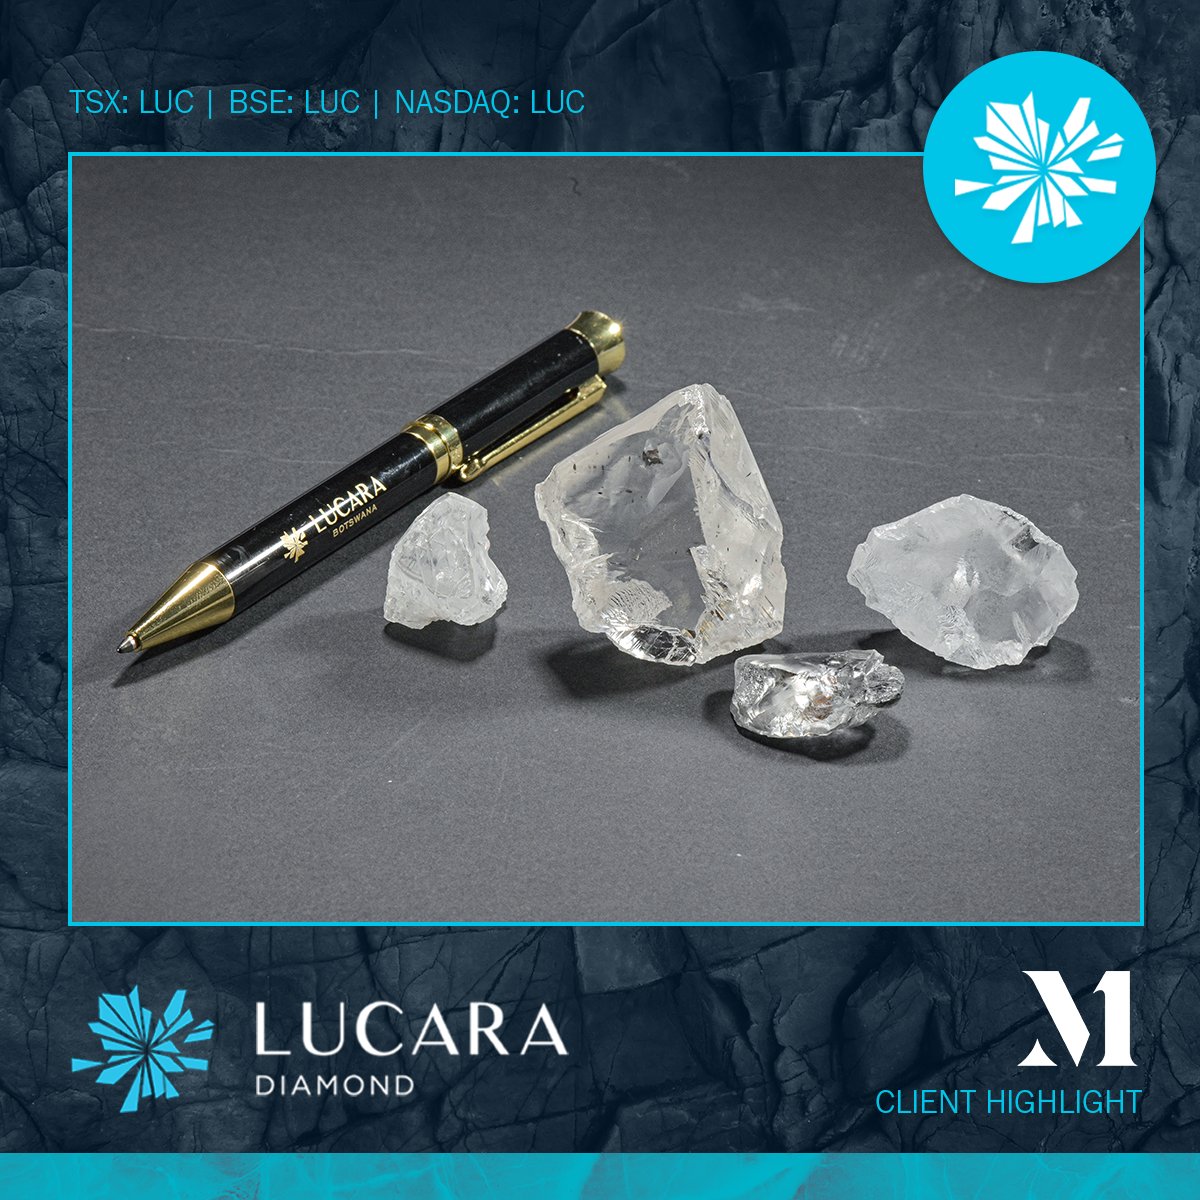 💎 Lucara (TSX: LUC) (BSE: LUC) (Nasdaq Stockholm: LUC) is shining bright after the recovery of a 320-carat, 111-carat, and two +50-carat stones from its fully owned Karowe Diamond Mine; situated in Botswana. William Lamb, President and CEO of Lucara Diamond Corp. shared his…